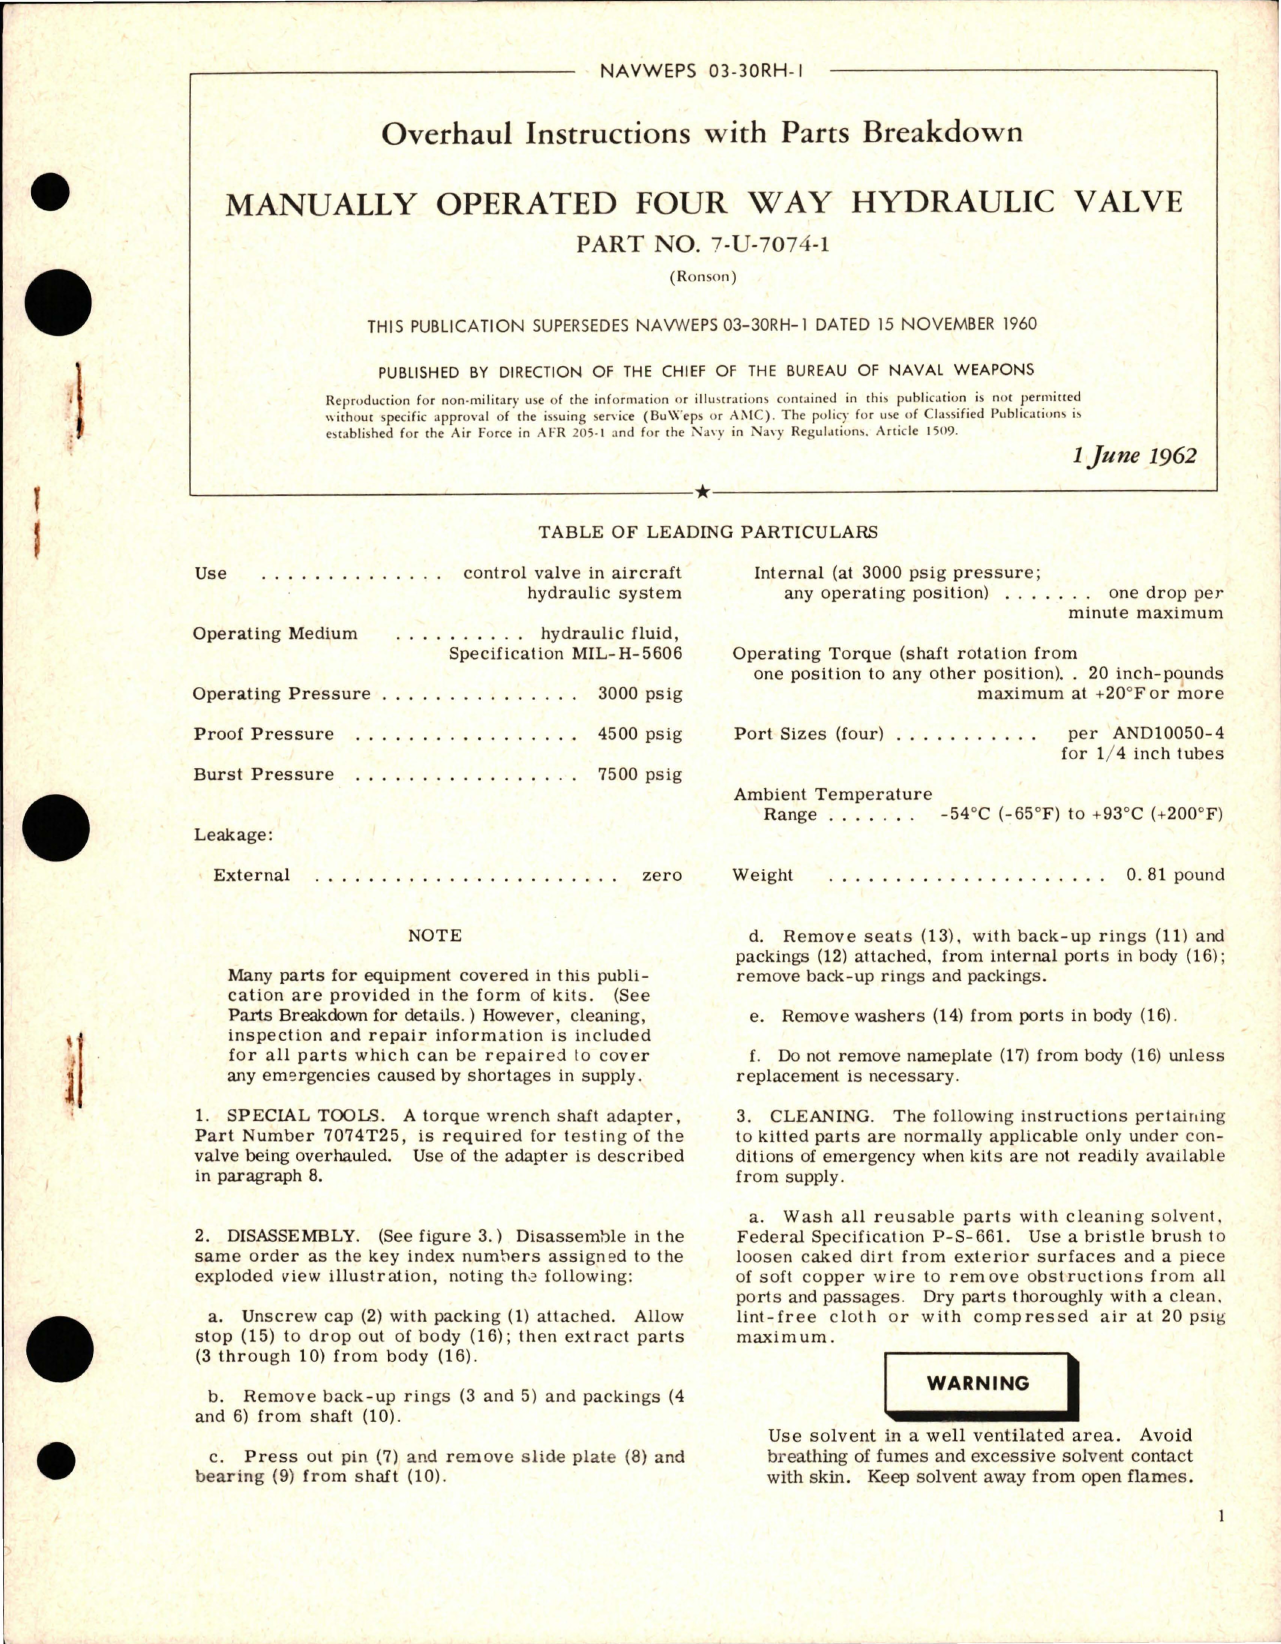 Sample page 1 from AirCorps Library document: Overhaul Instructions with Parts Breakdown for Manually Operated Four Way Hydraulic Valve - Part 7-U-7074-1